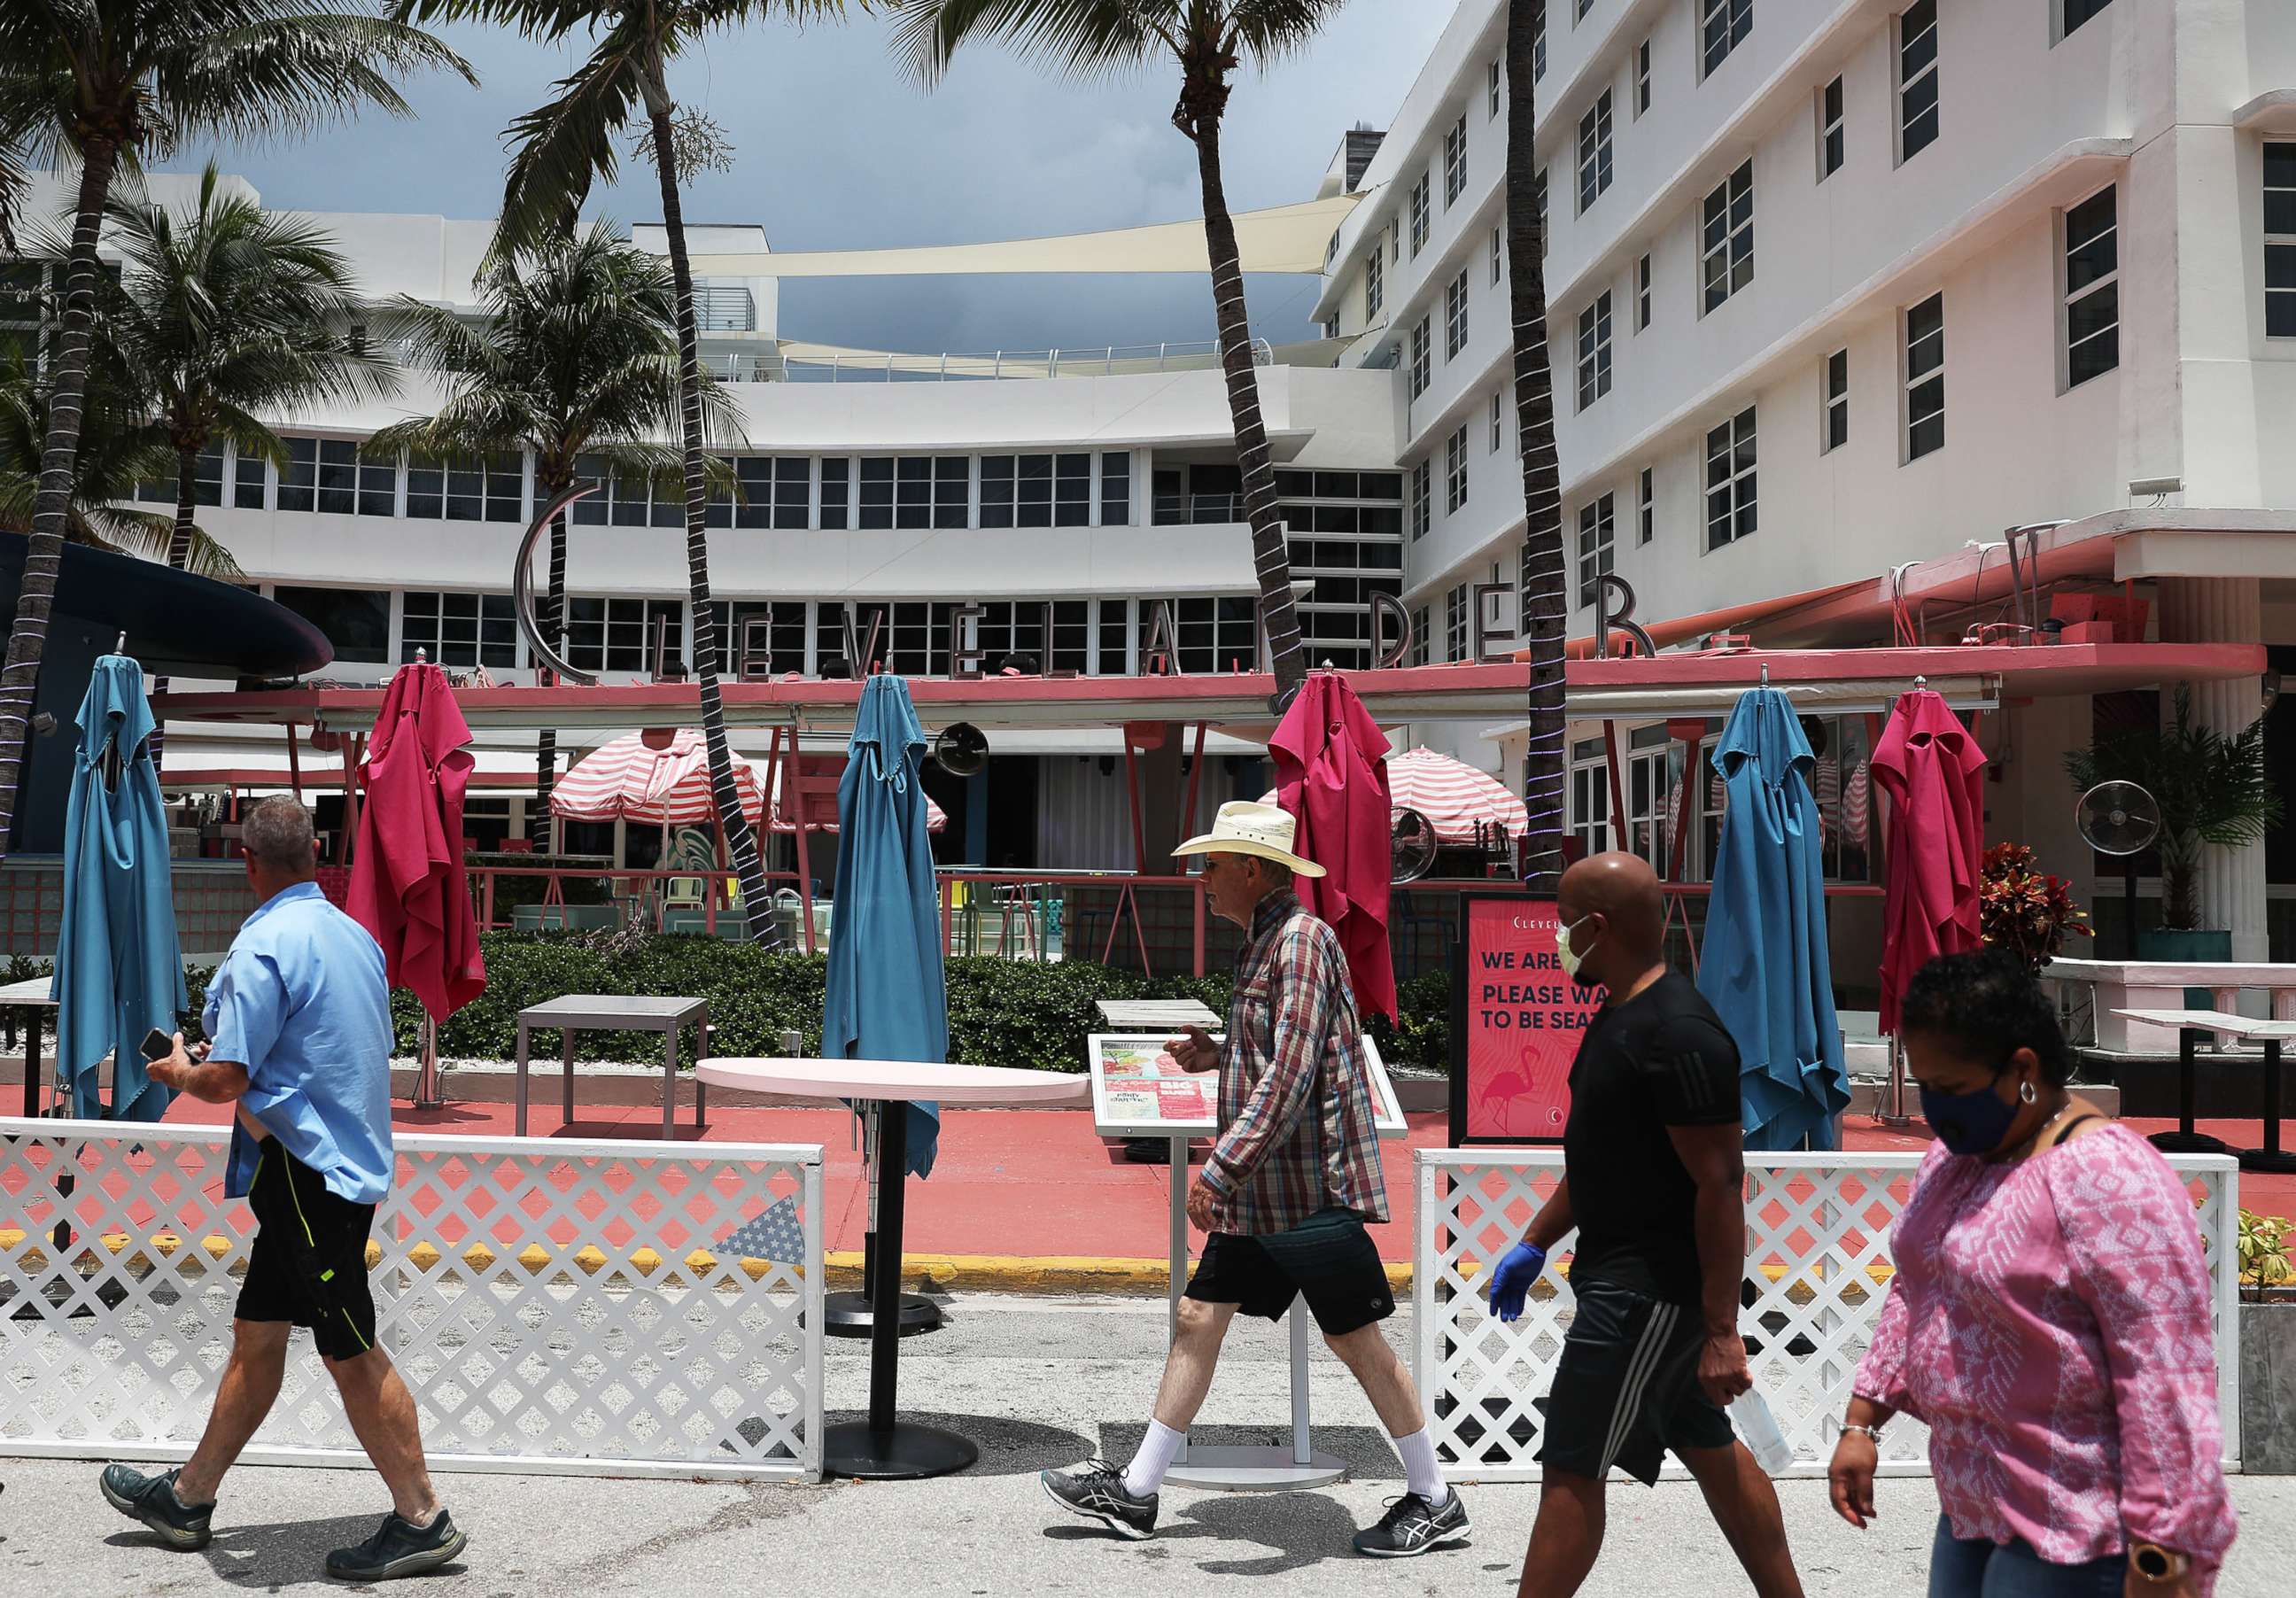 PHOTO: People walk past the Clevelander South Beach Hotel on July 13, 2020, in Miami Beach, Fla. The hotel announced it was closing again until further notice due to growing concerns about the Covid-19 pandemic in Miami-Dade County.